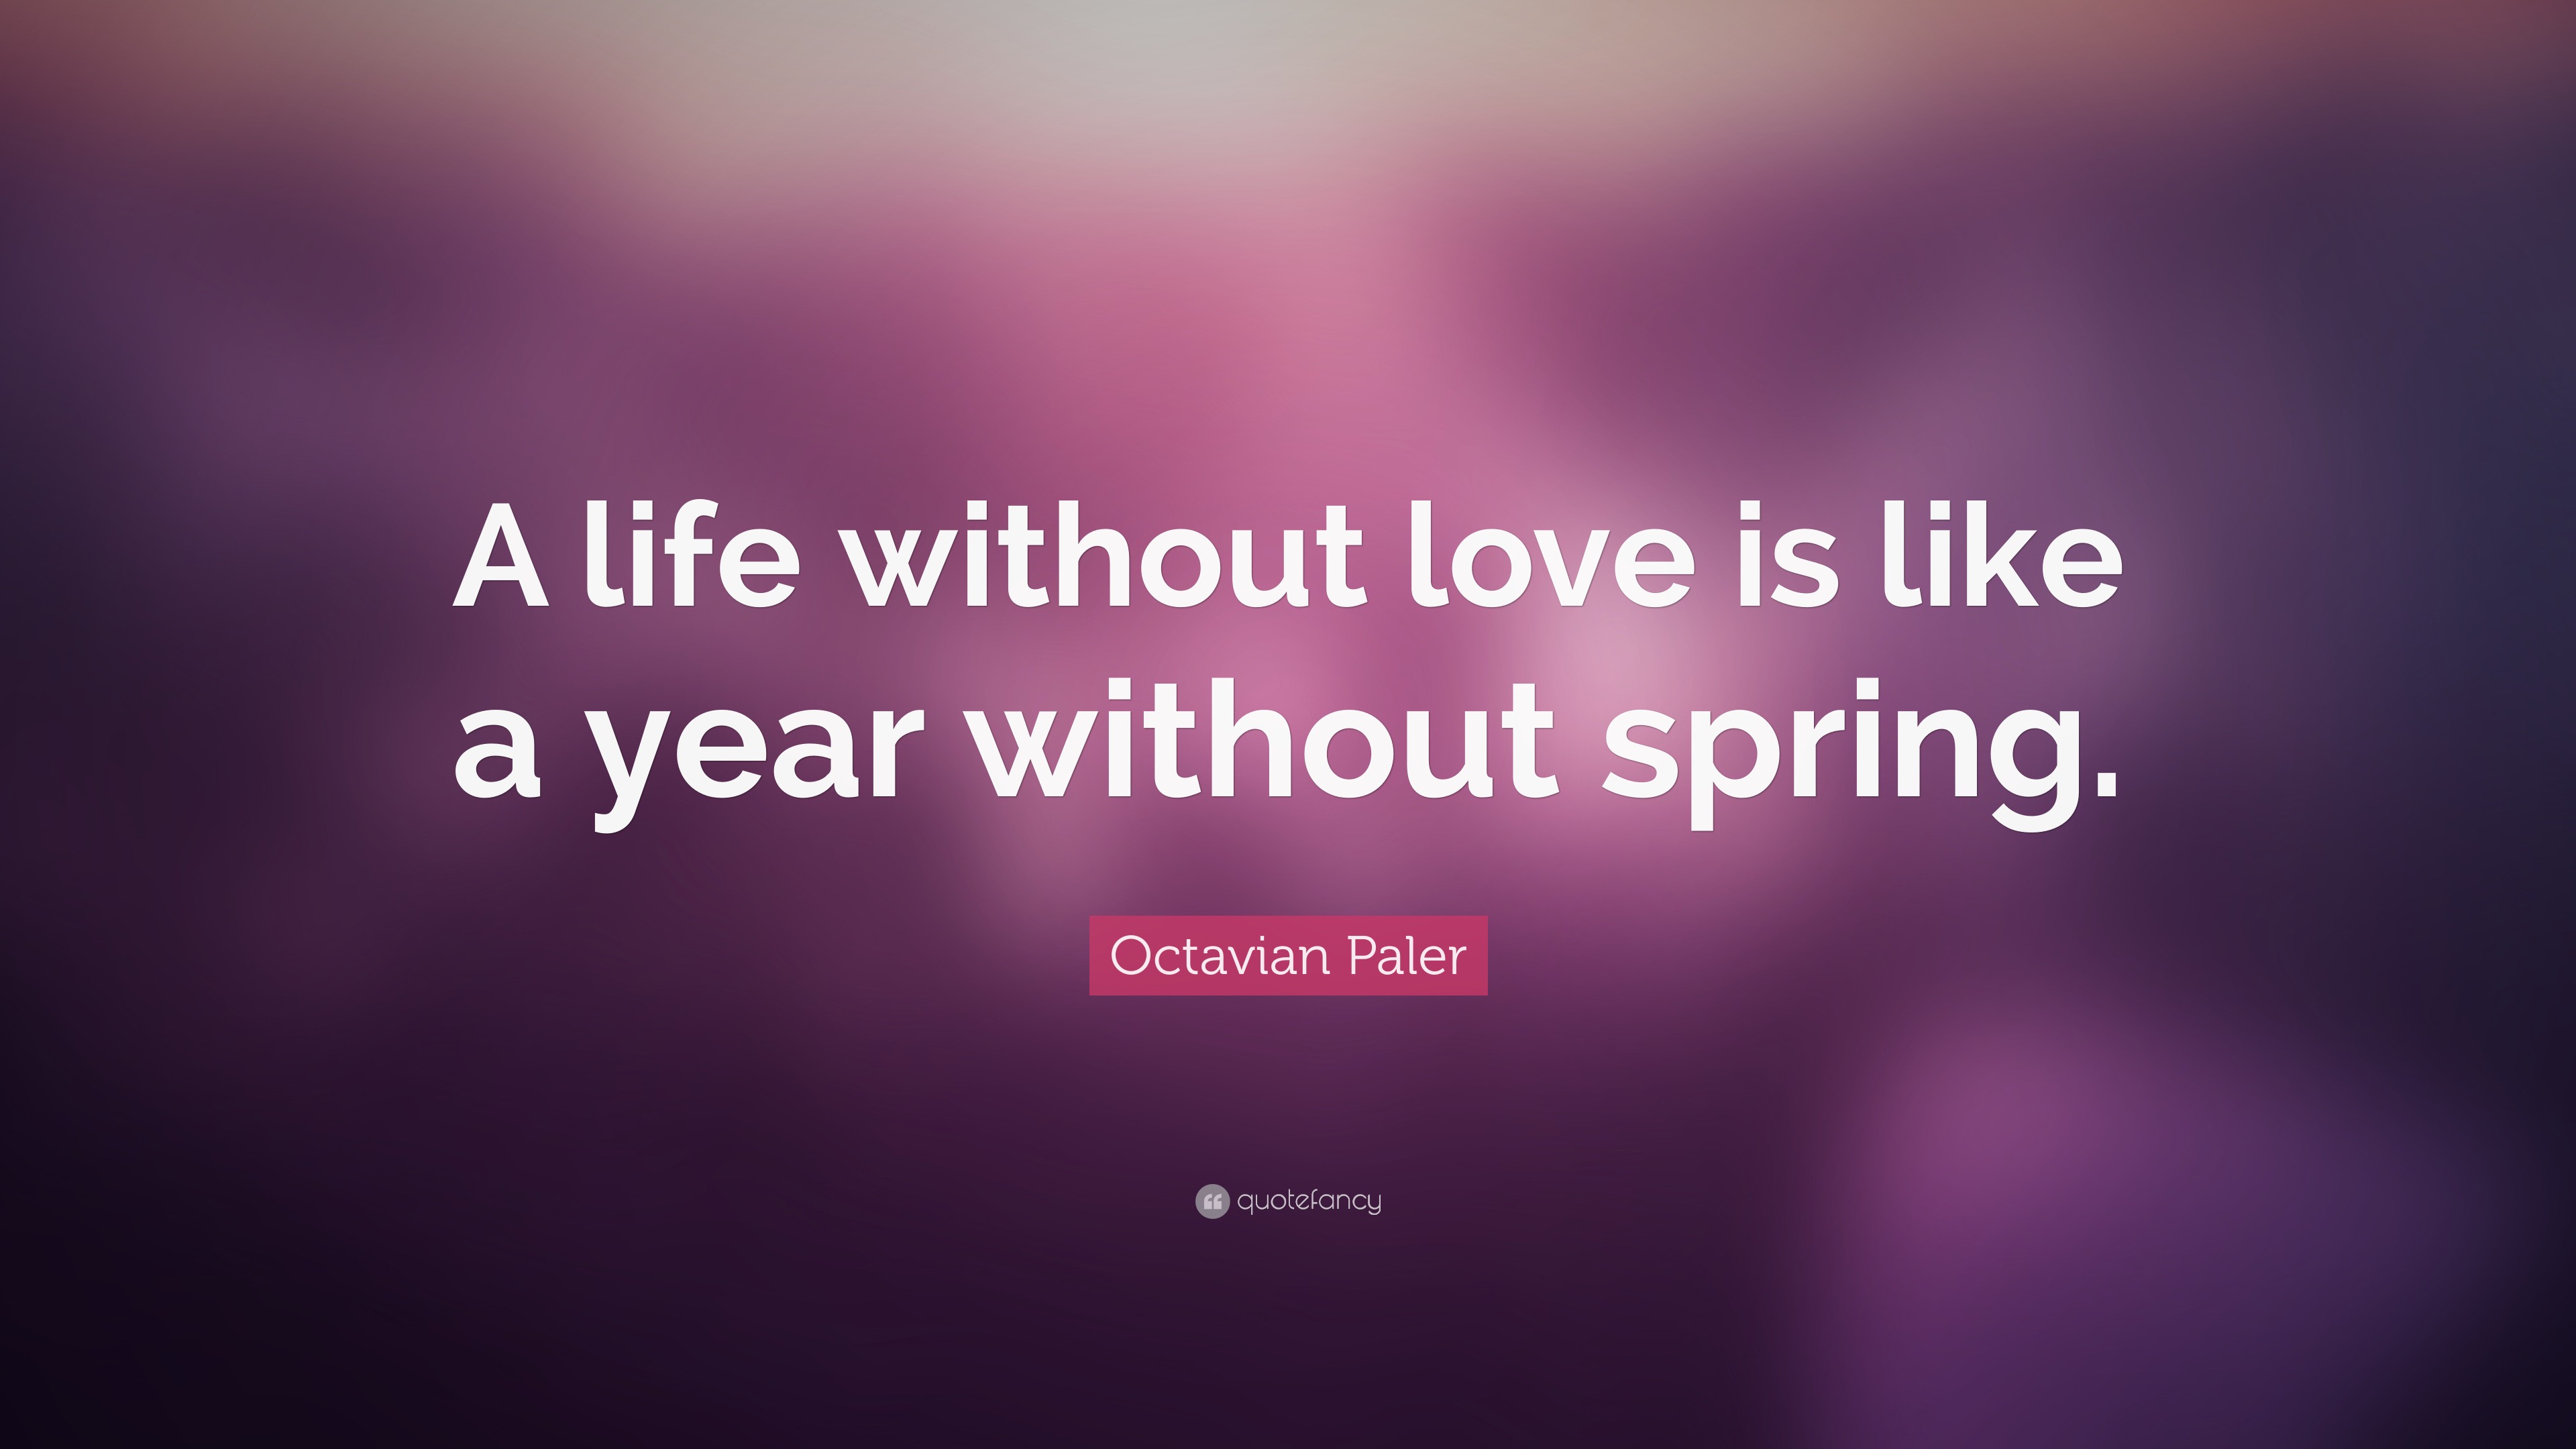 Octavian Paler Quote: “A life without love is like a year without spring.”